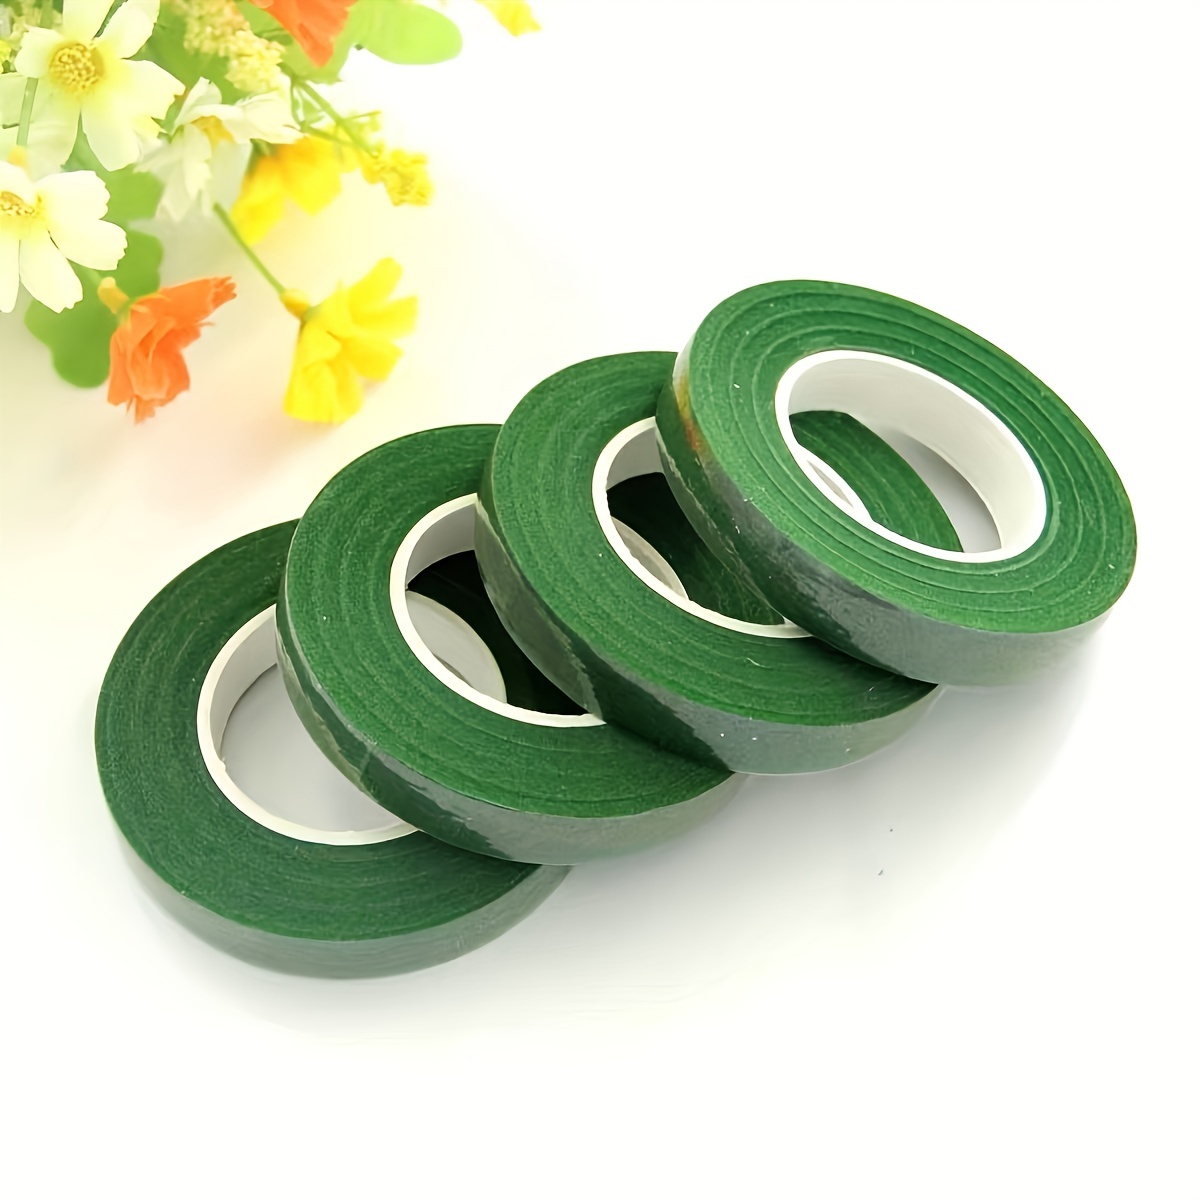 homemade green tape/homemade floral tape/how to make floral tape